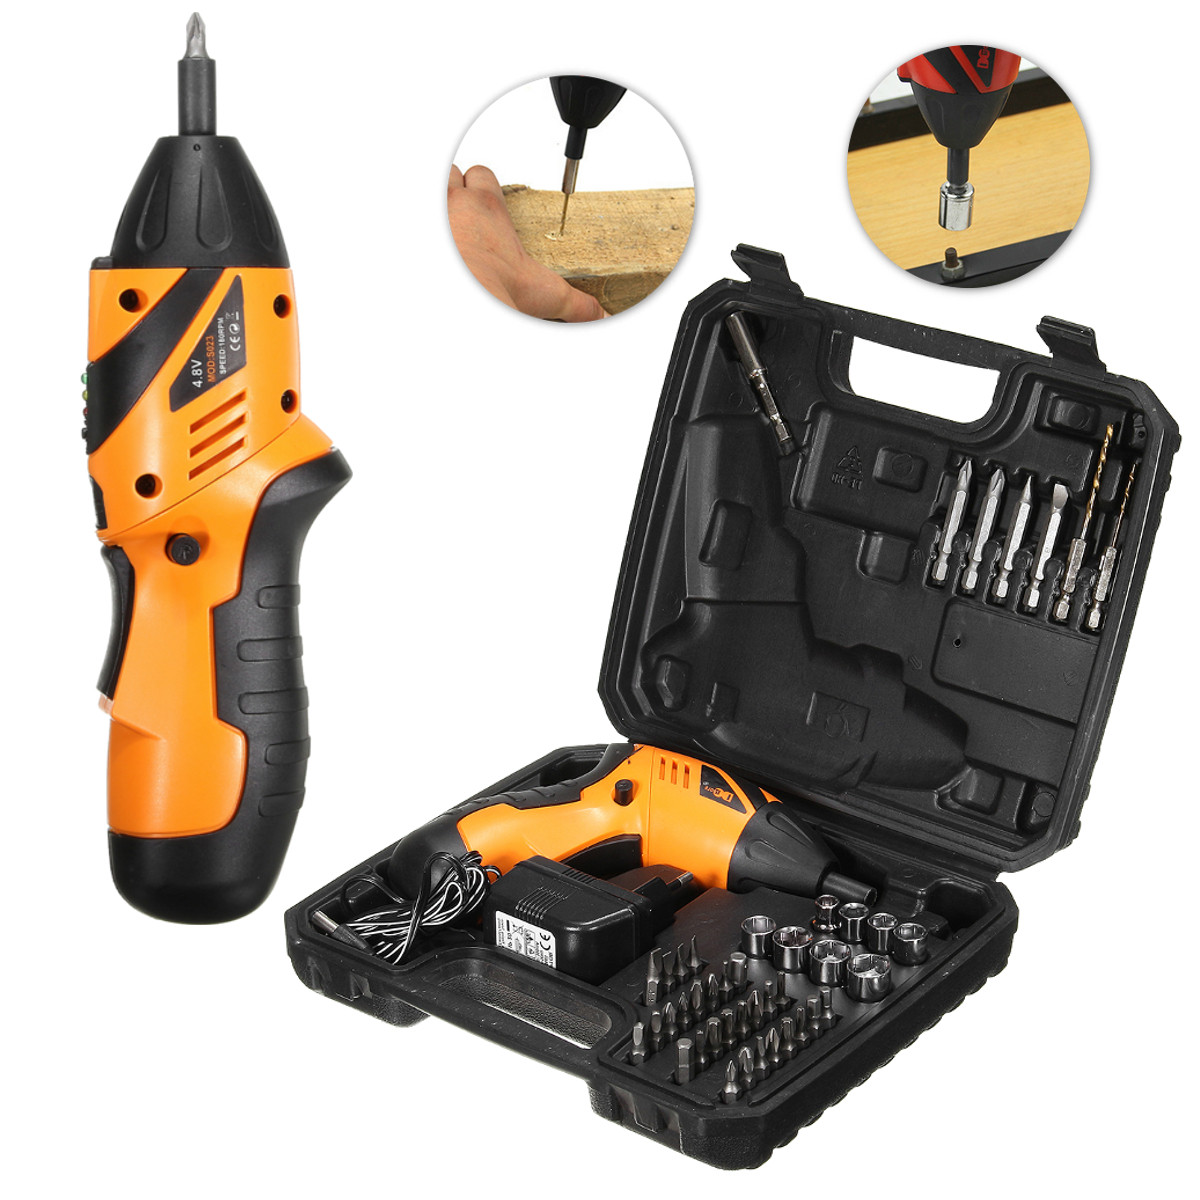 DCTOOLS-45-In-1-Non-slip-Electric-Drill-Cordless-Screwdriver-Foldable-with-US-Charger-1145930-2